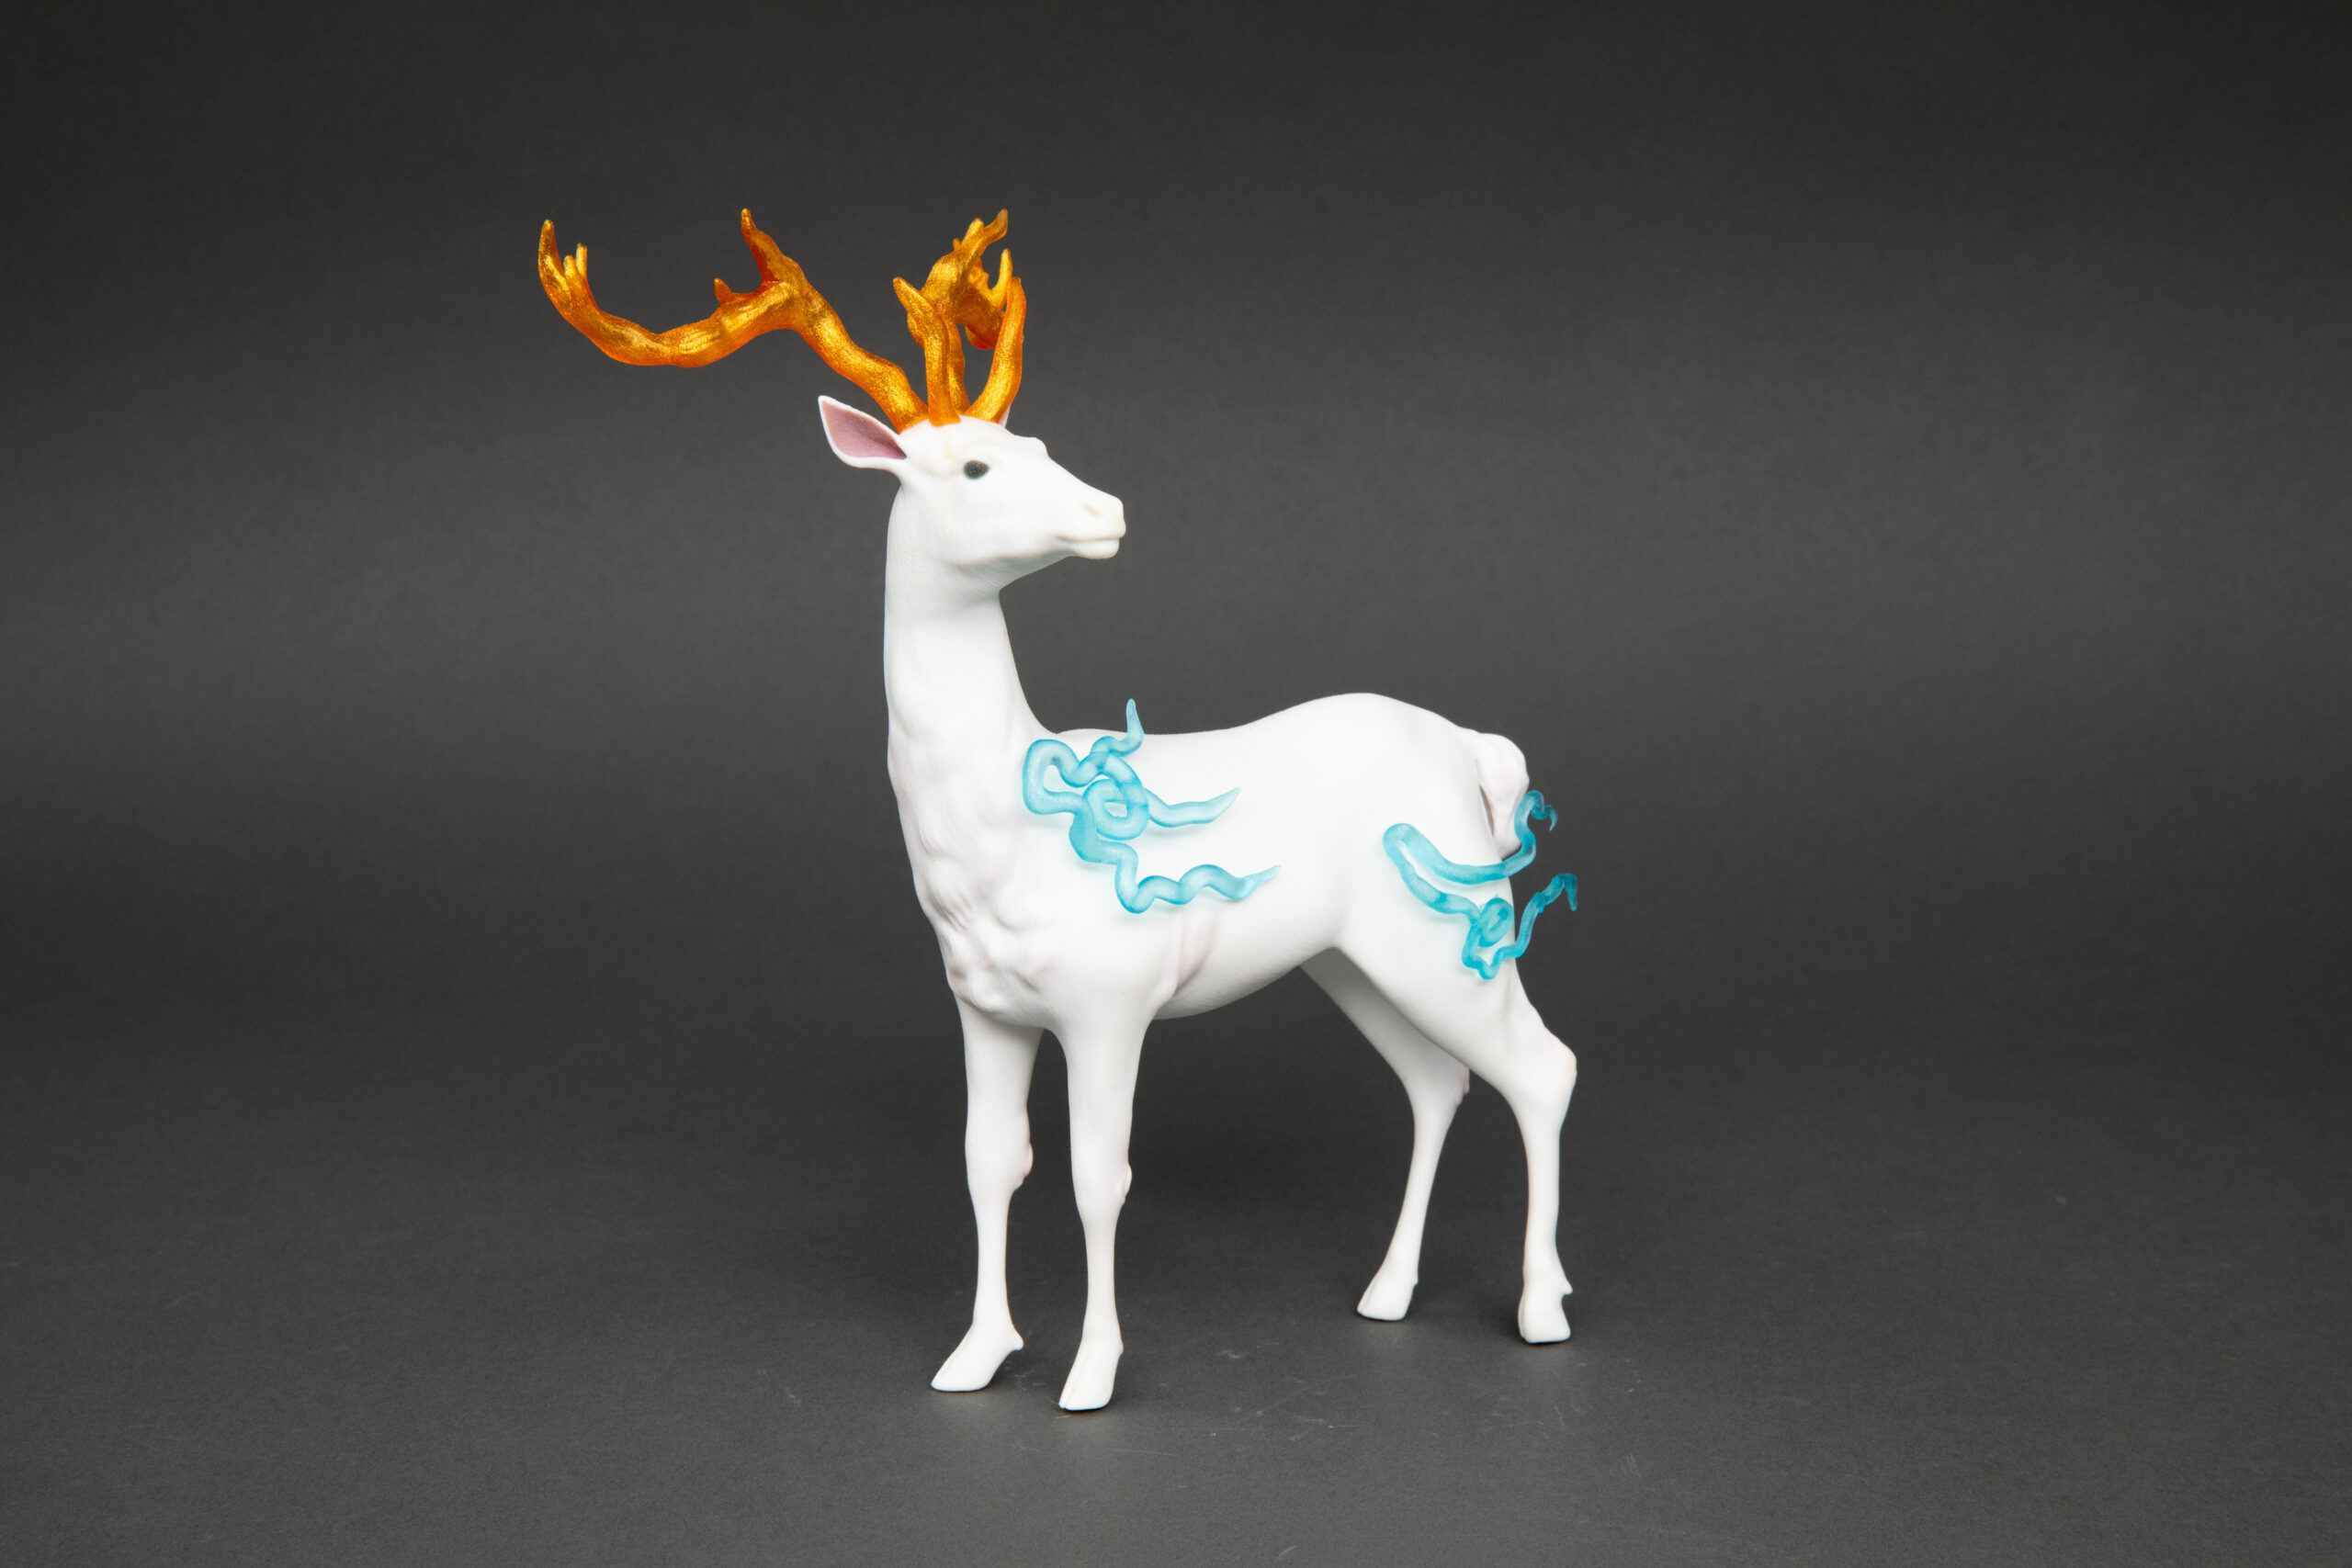 Fuzhu is one of the mythical creatures in ancient Chinese legends. It is described as a deer with four antlers, and its appearance is gentle and pure. Fuzhu likes to frolic around, and according to legend, its appearance is often associated with floods.